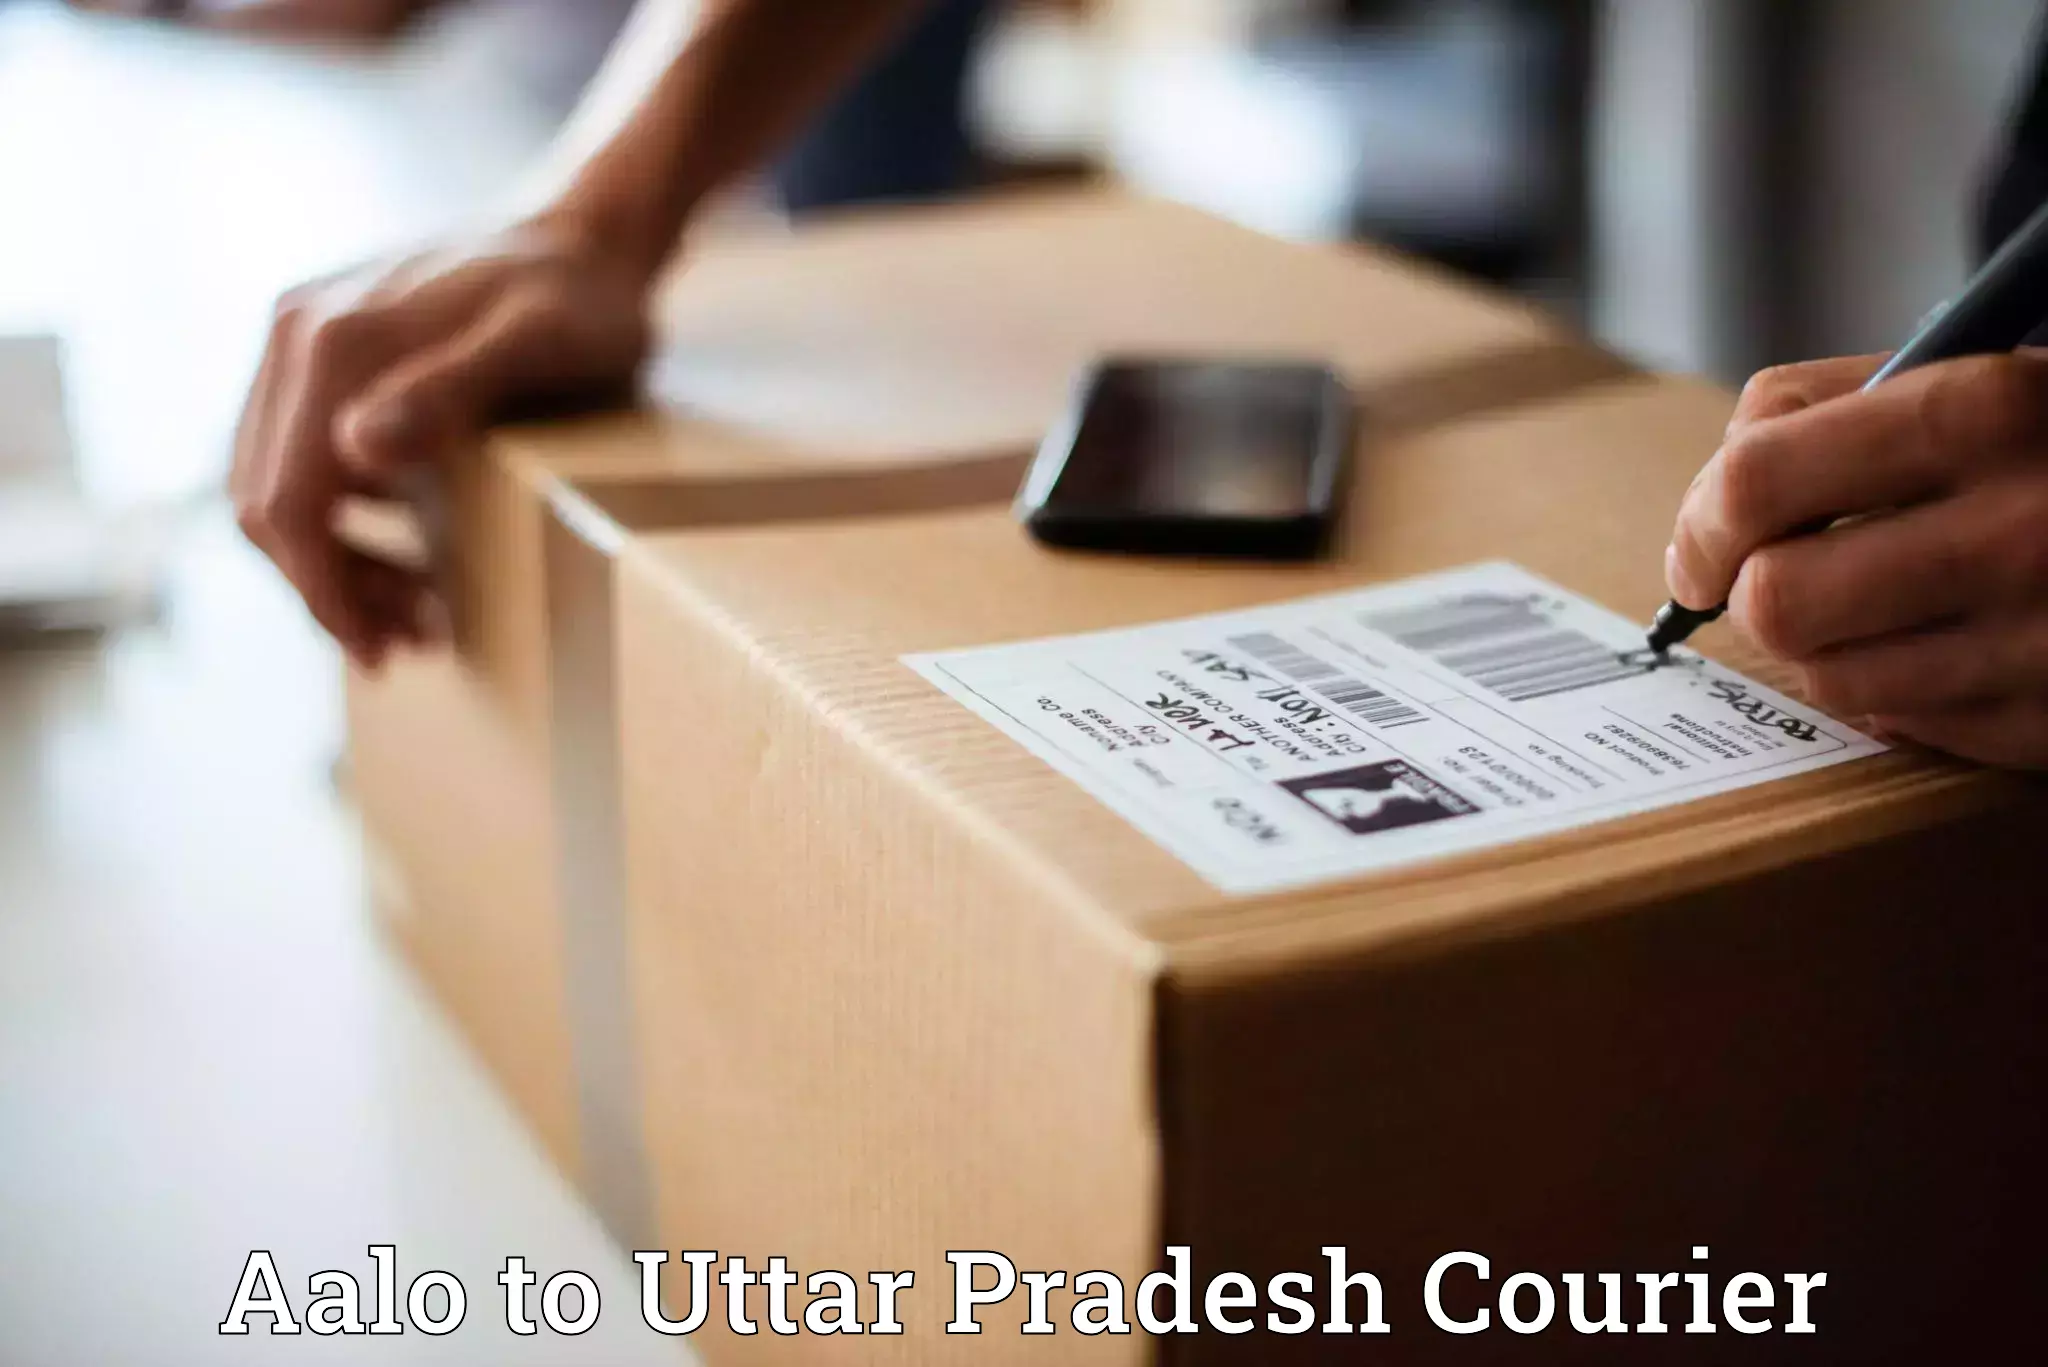 On-call courier service Aalo to Hathras